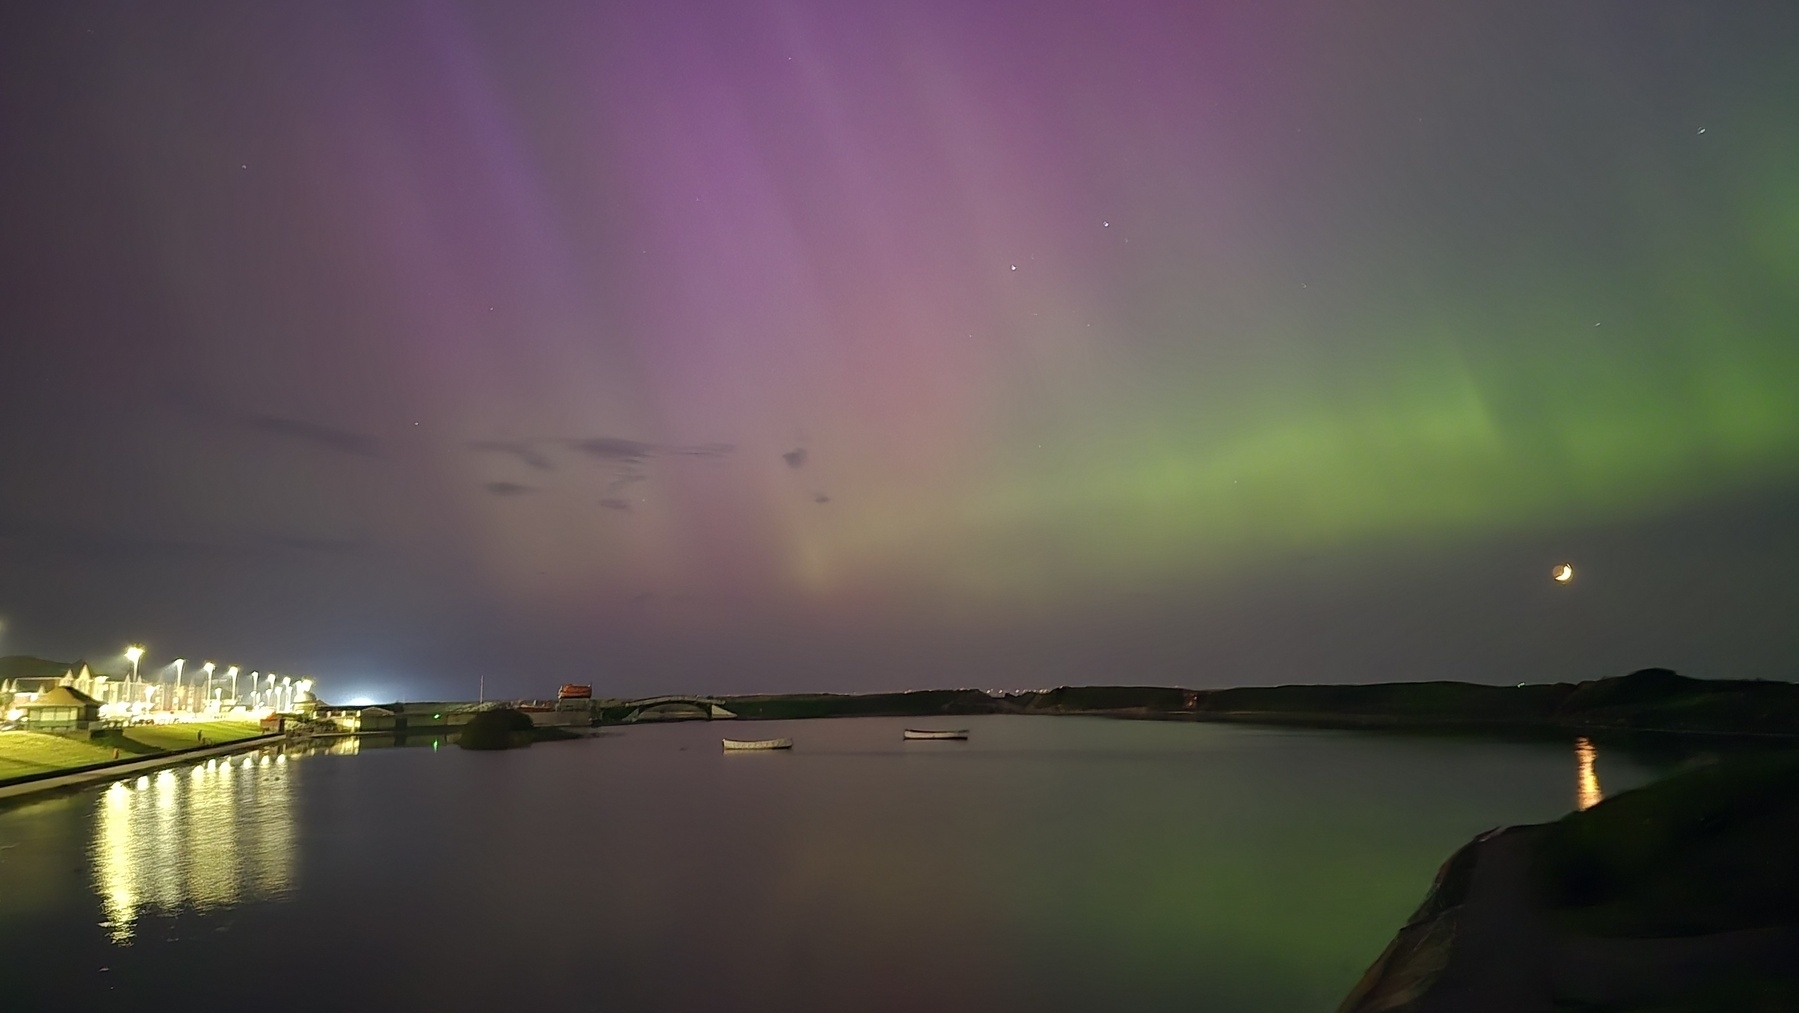 Aurora over a boating lake with green reflections in the water